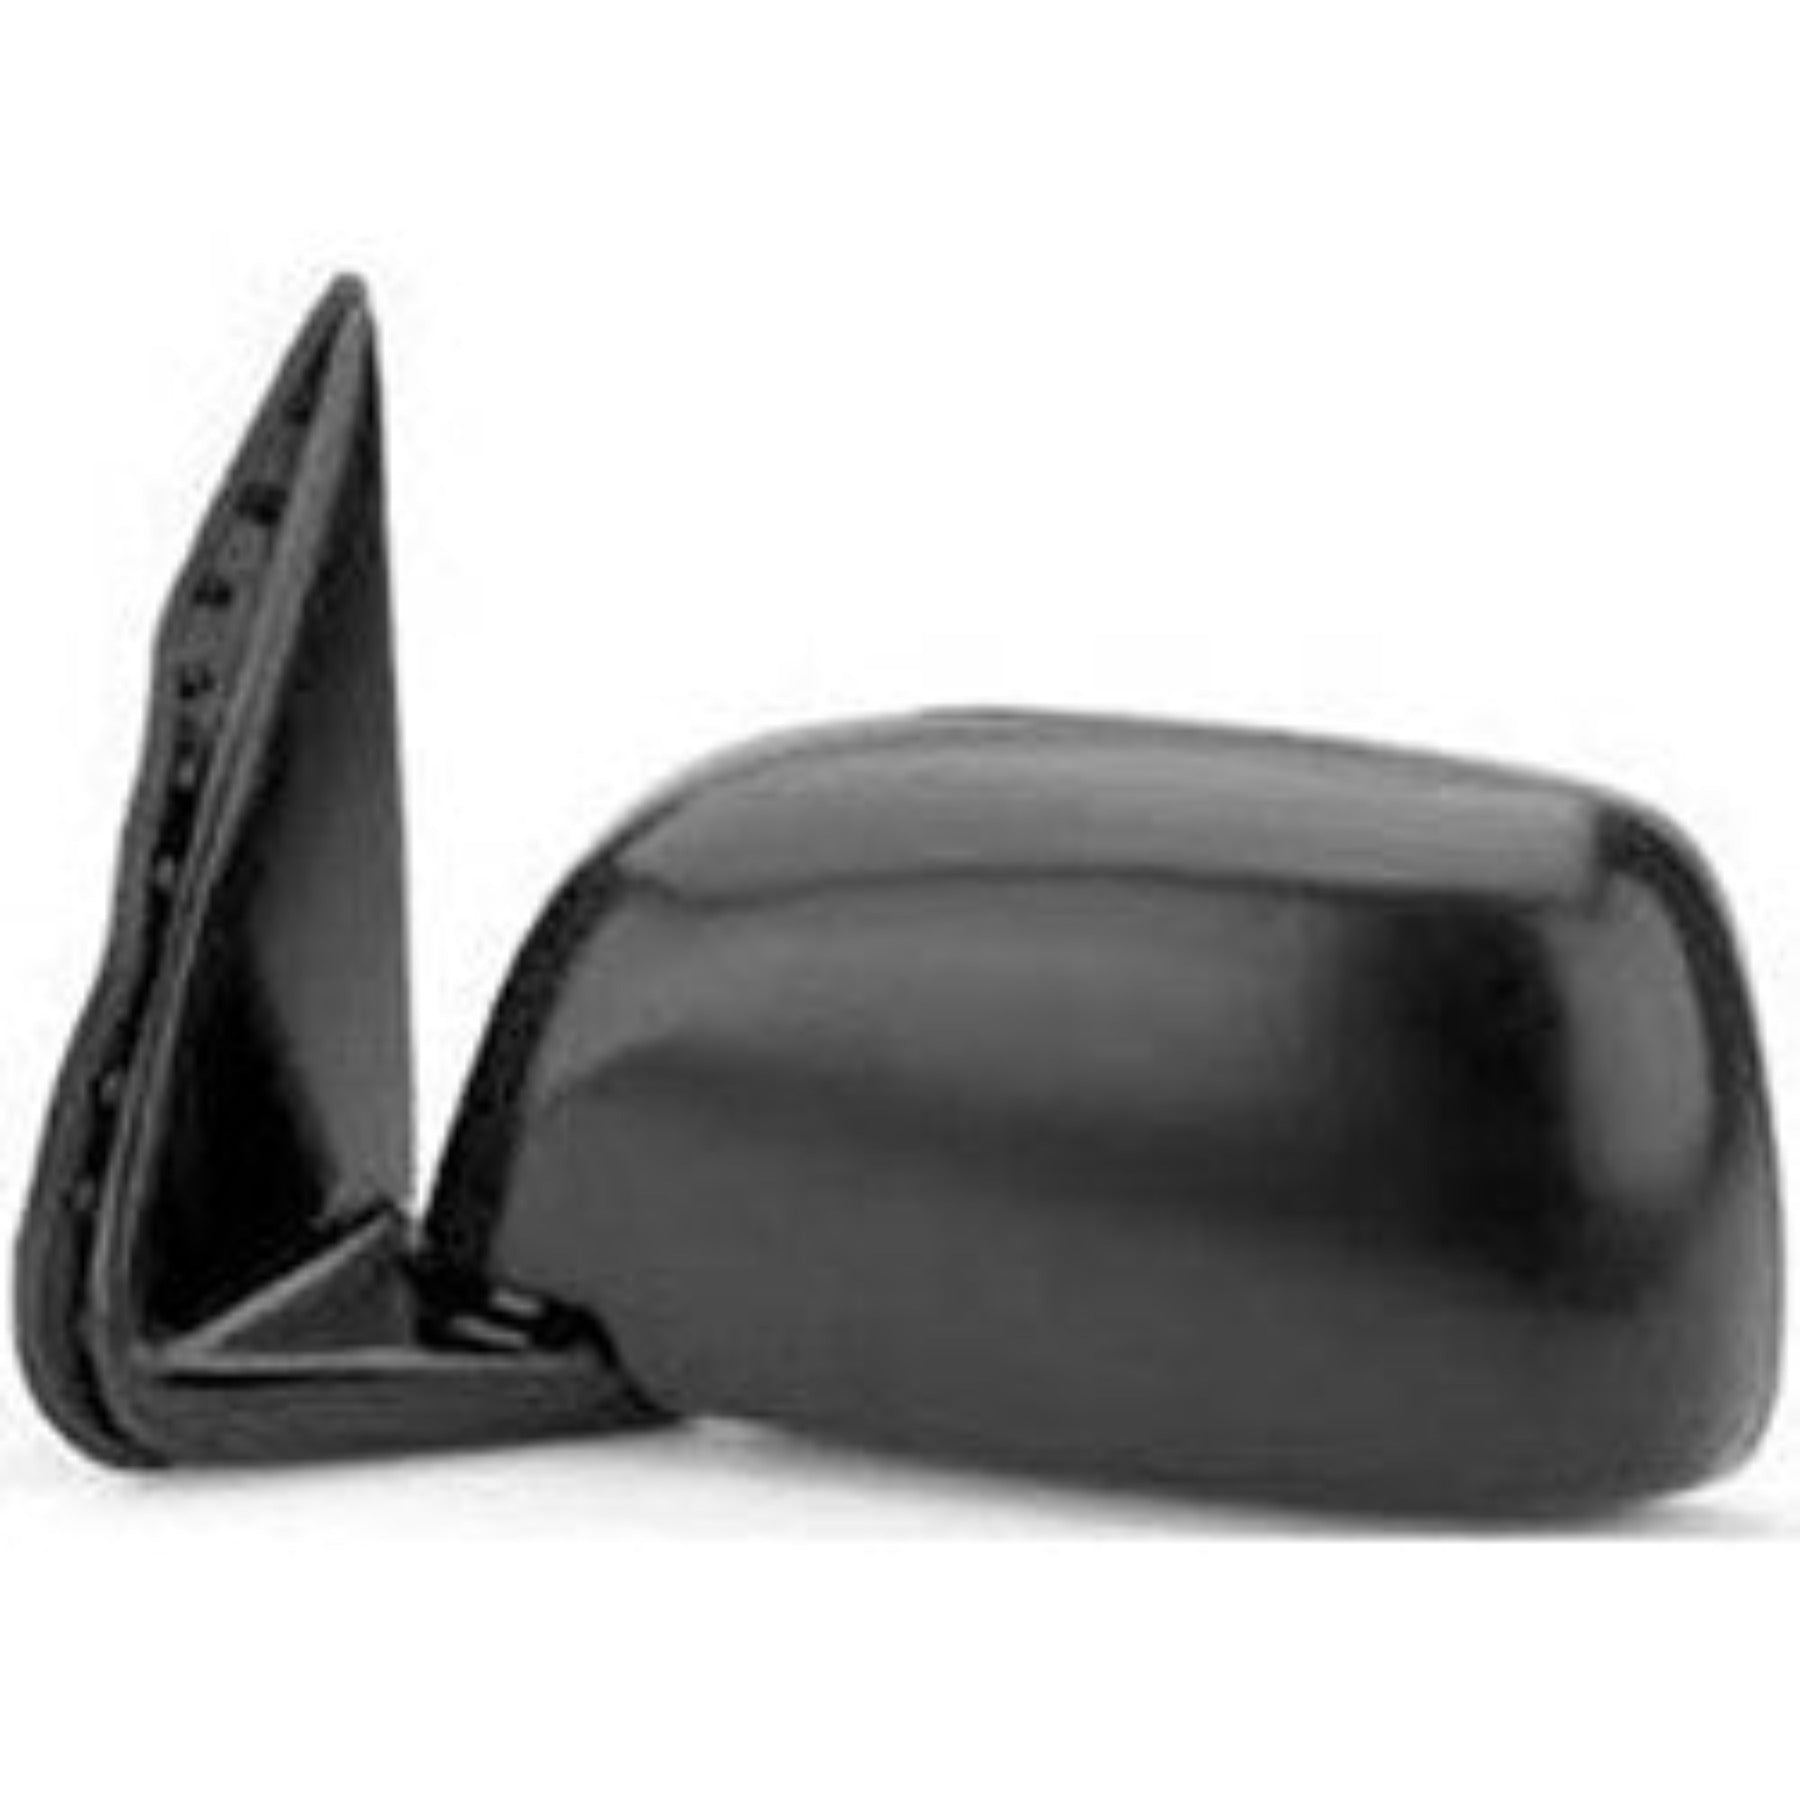 2000-2000 Toyota Tacoma Mirror (Driver Side); Pick-up; 2WD/4WD; Manual; Manual Folding; Non-Heated; 9 x 7 in. Housing; w/ Off-Road Package; TO1320161; 8794035531